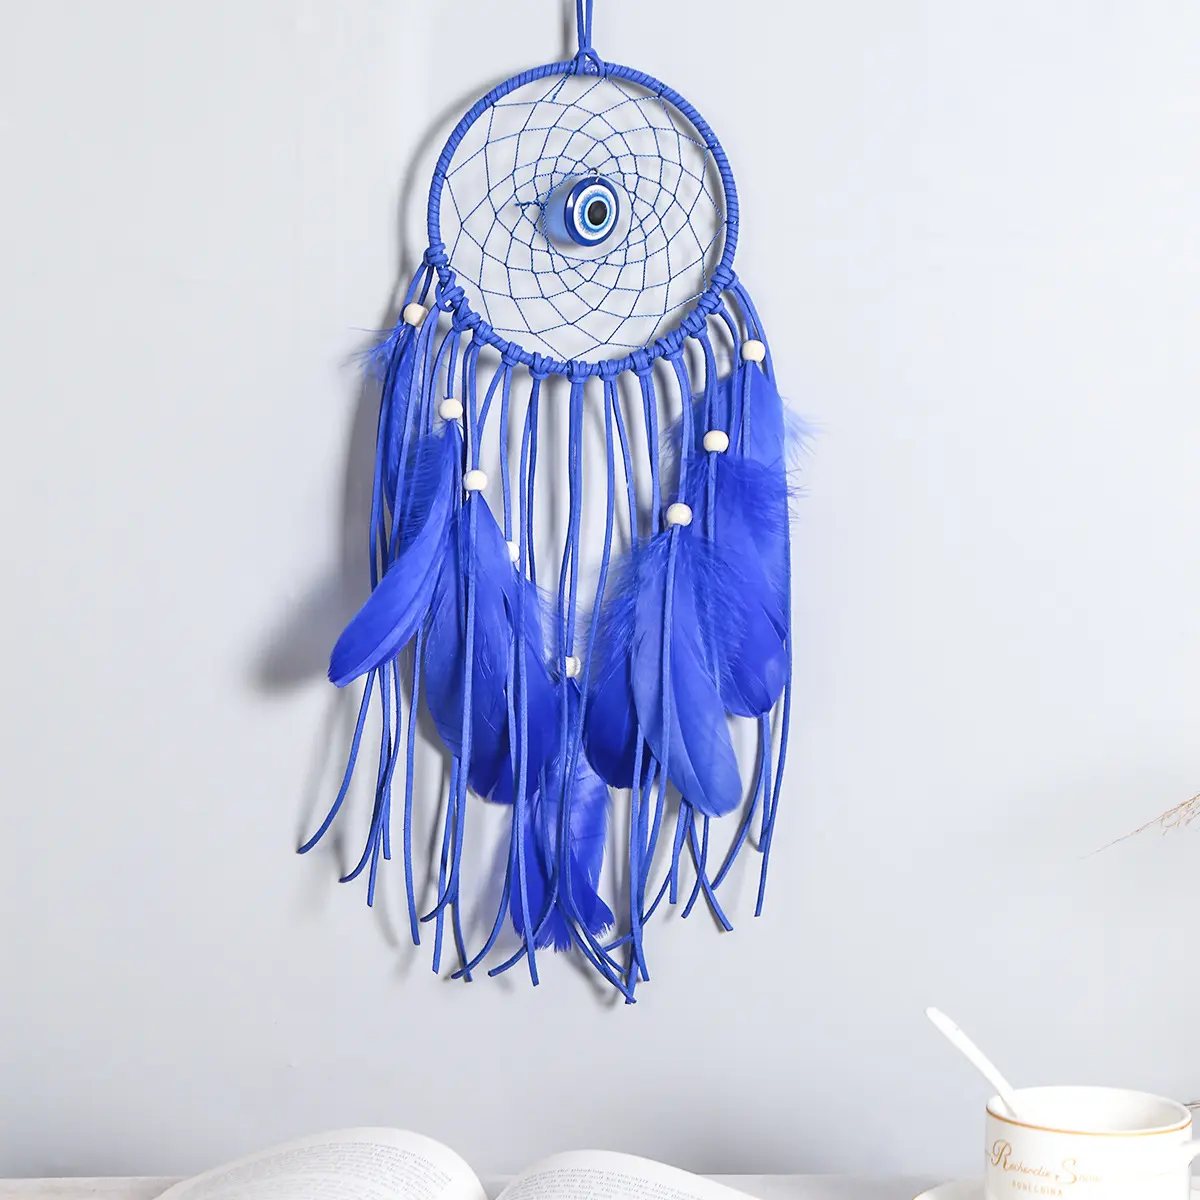 Hotselling Home Wall Hanging Decor Blue Evil Eye Dreamcatcher Native Style Woven Decoration